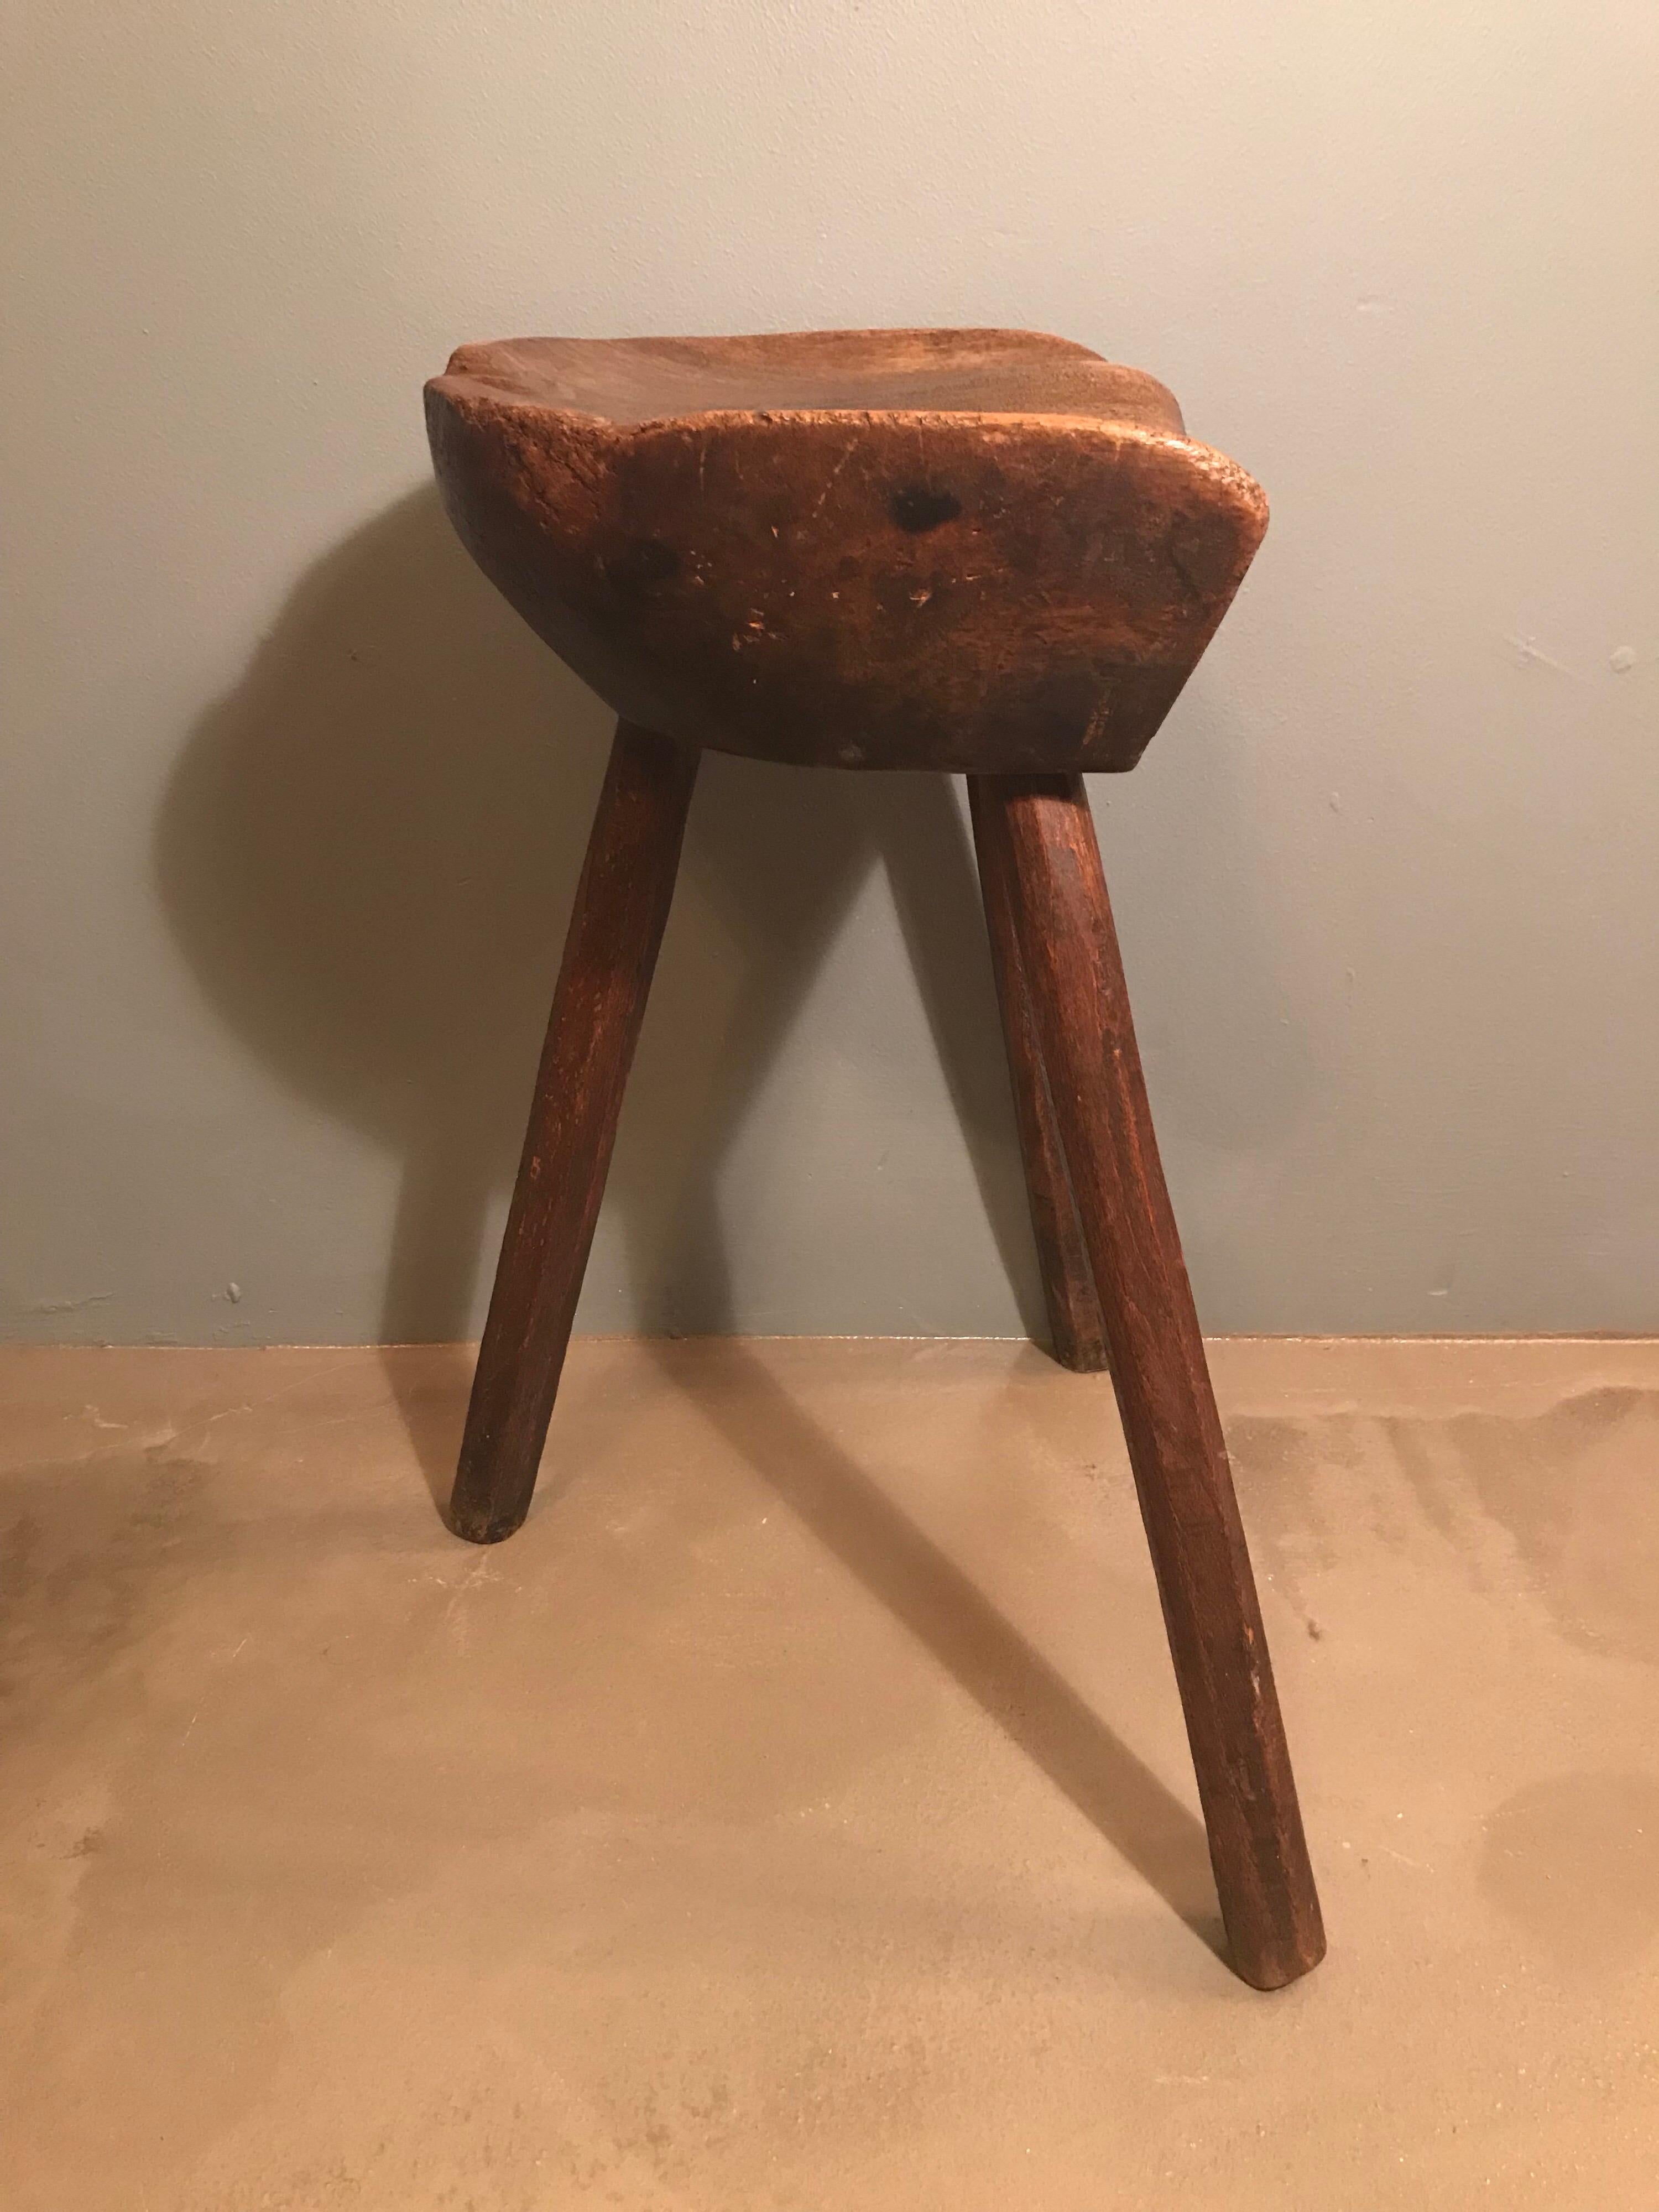 19th century Danish milking stool in cherry wood and oak.
Lovely wear and patina to the wood.
Very stabile.
Great piece of Folk Art.
 